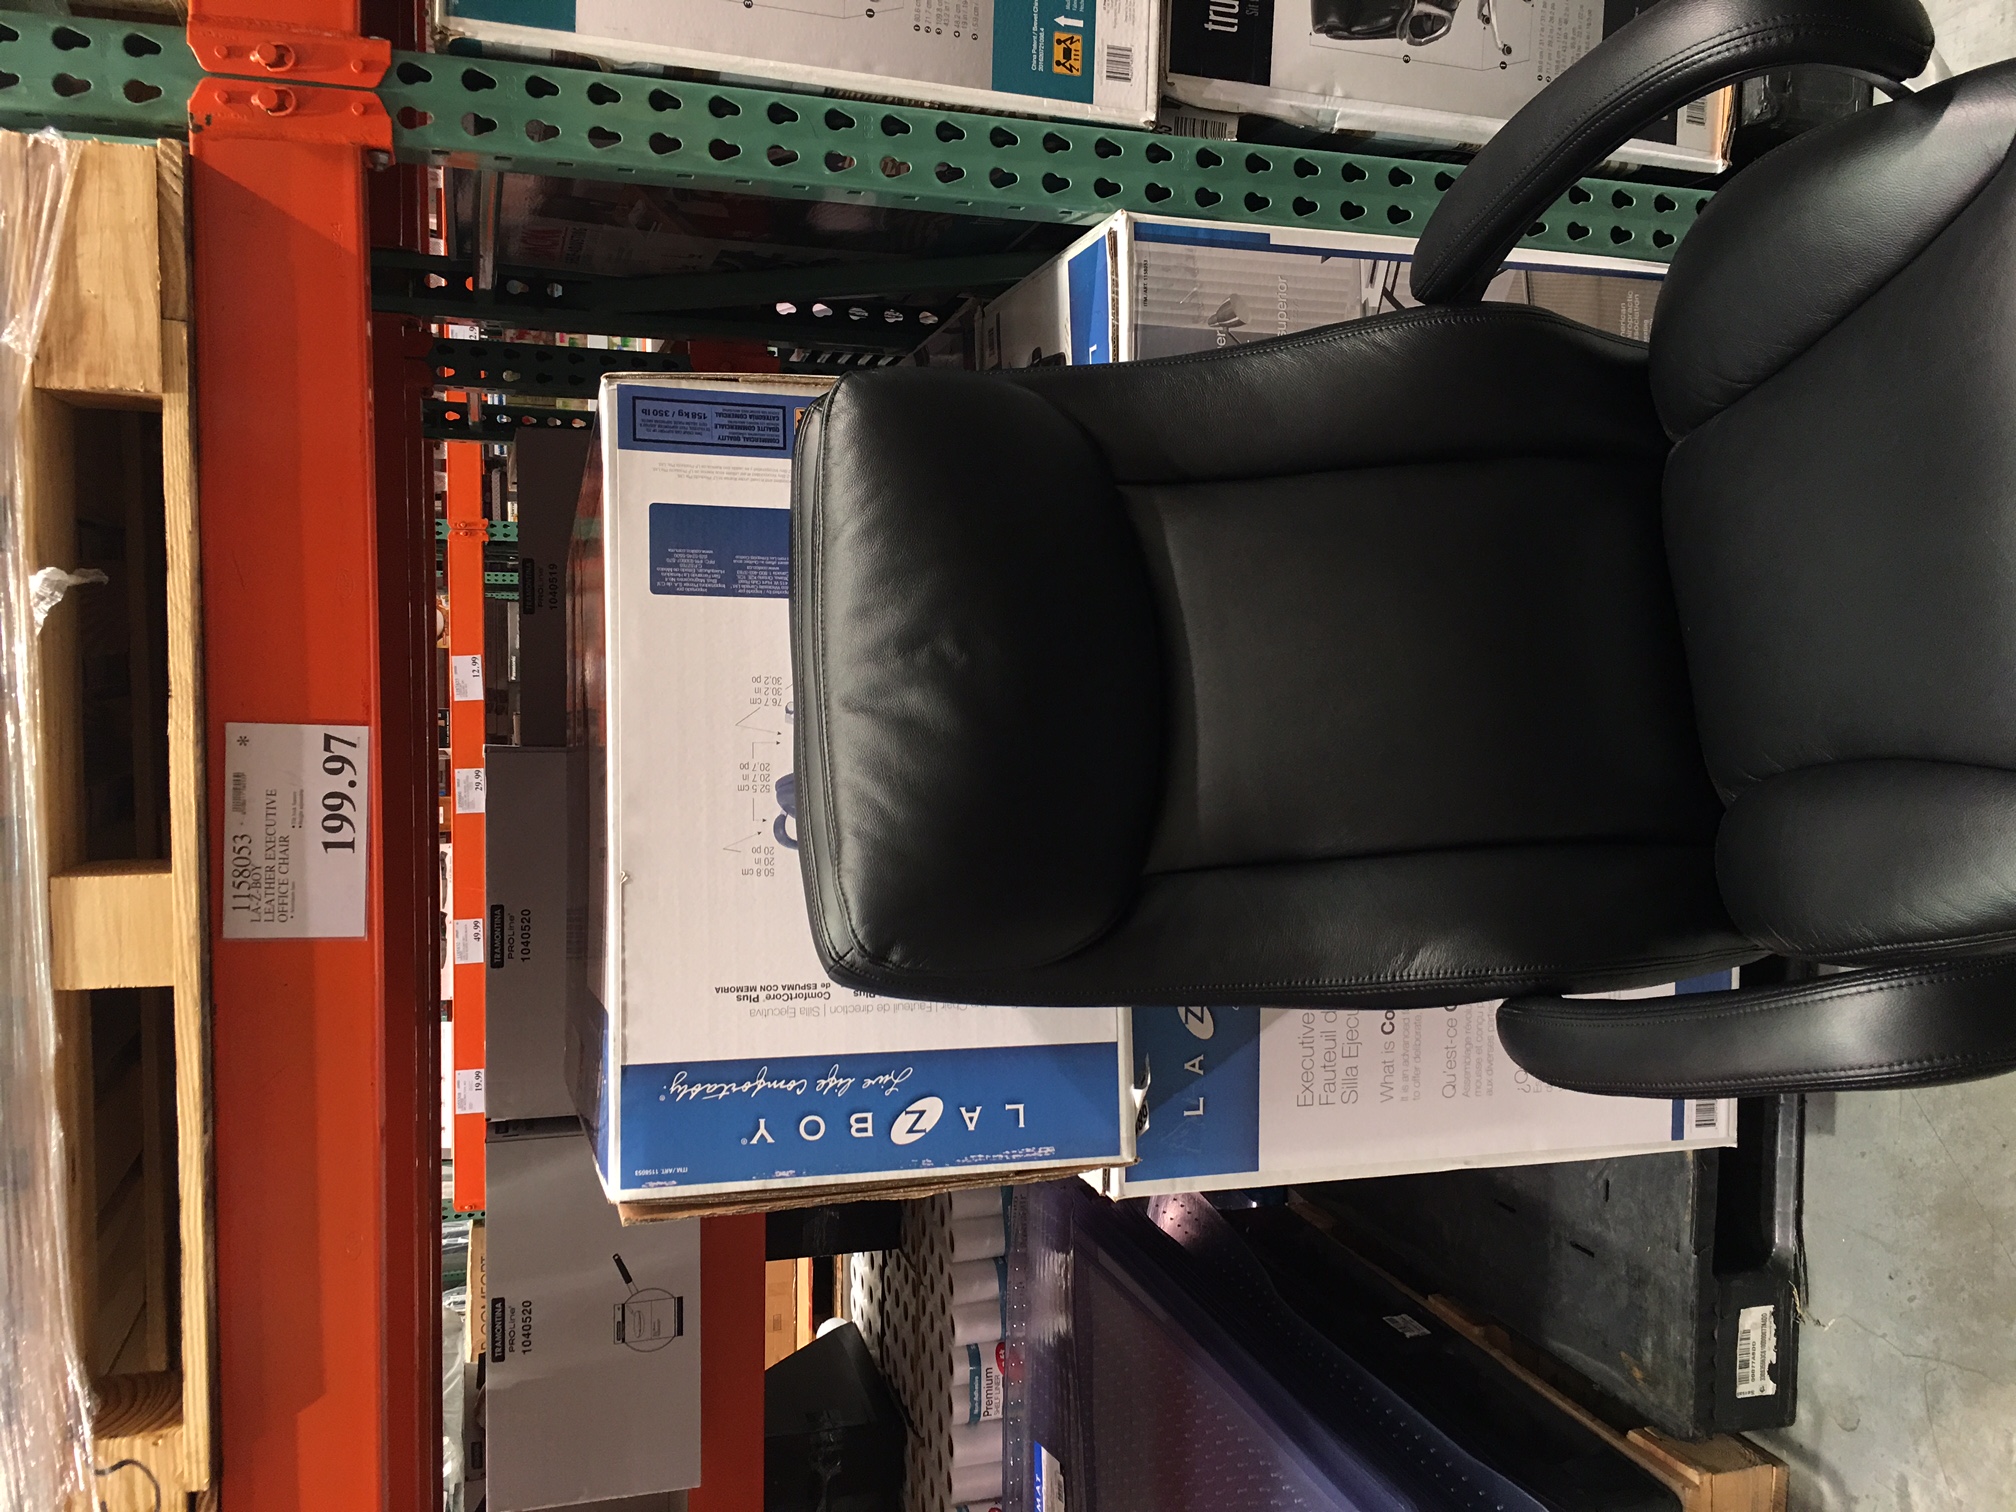 La Z Boy Leather Executive Office Chair At Costco For 199 97 Ymmv